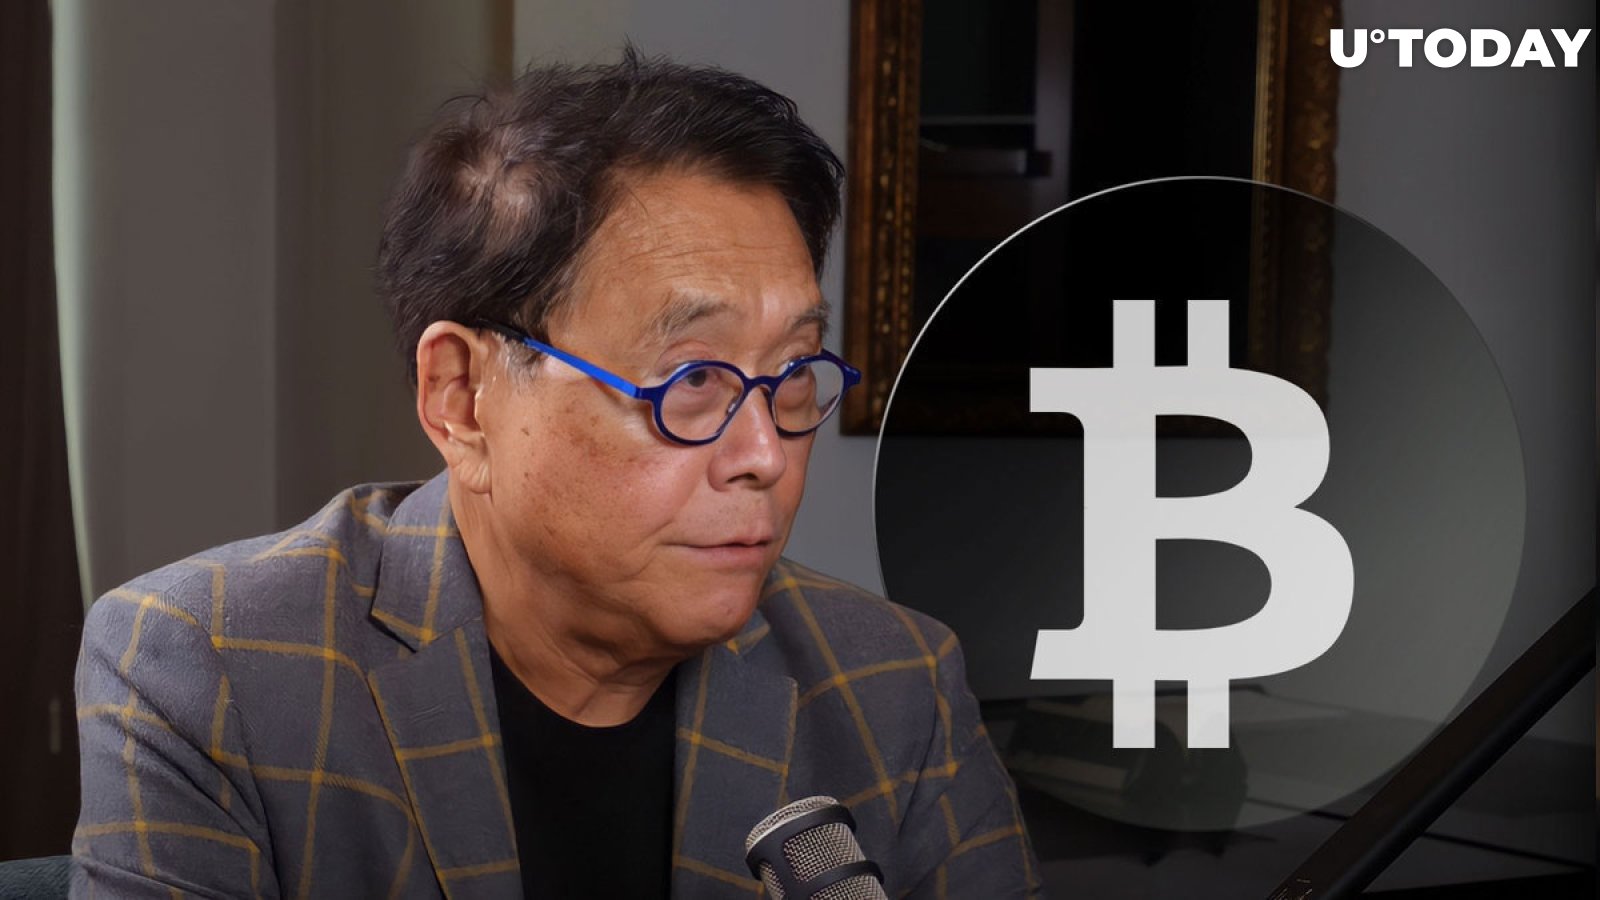 'Rich Dad Poor Dad' Author Names Bitcoin as Antidote to Hyperinflation